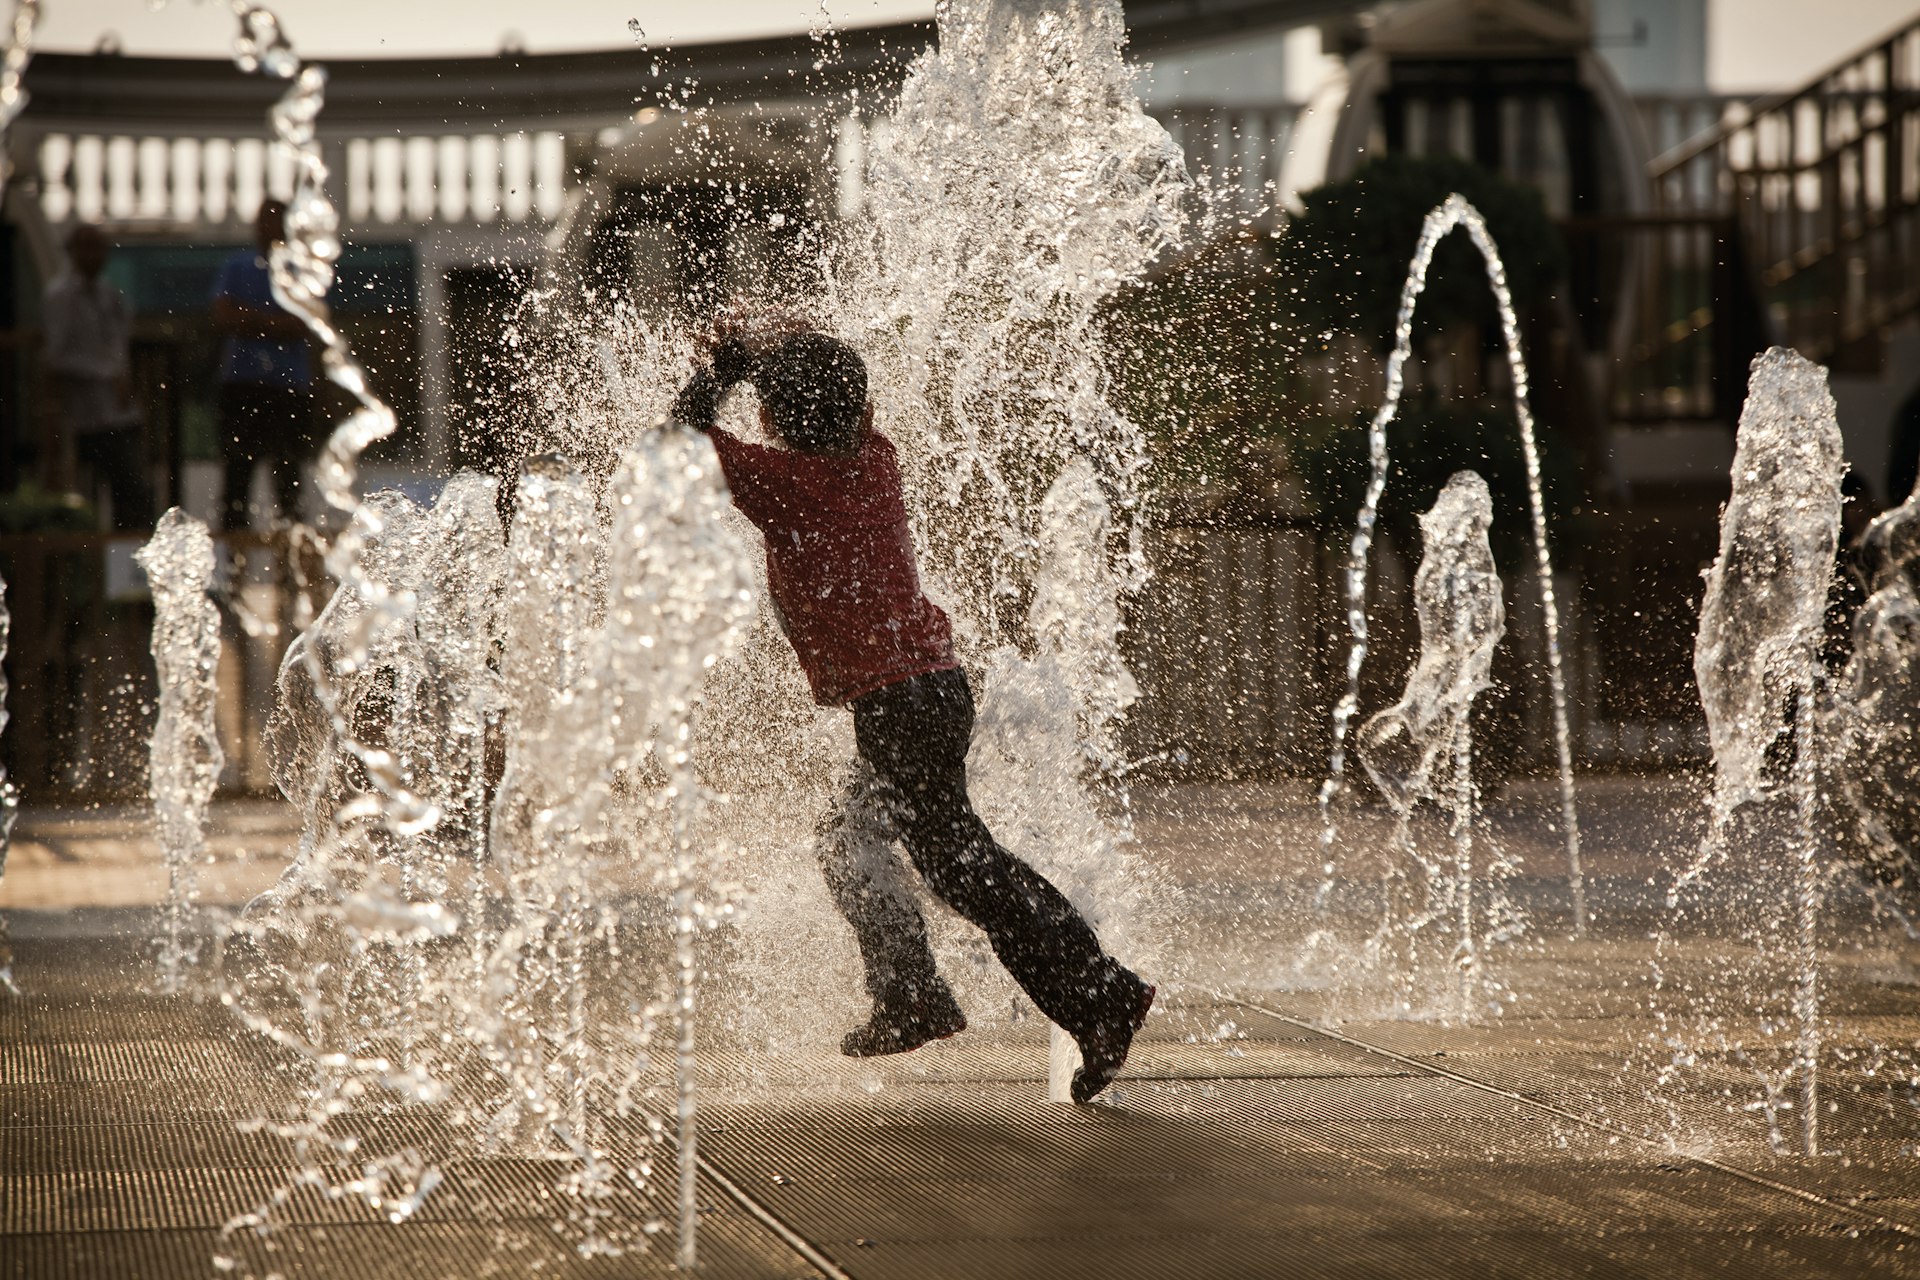 A child leaps through a series of water jets that are firing water up into the air from the pavement.